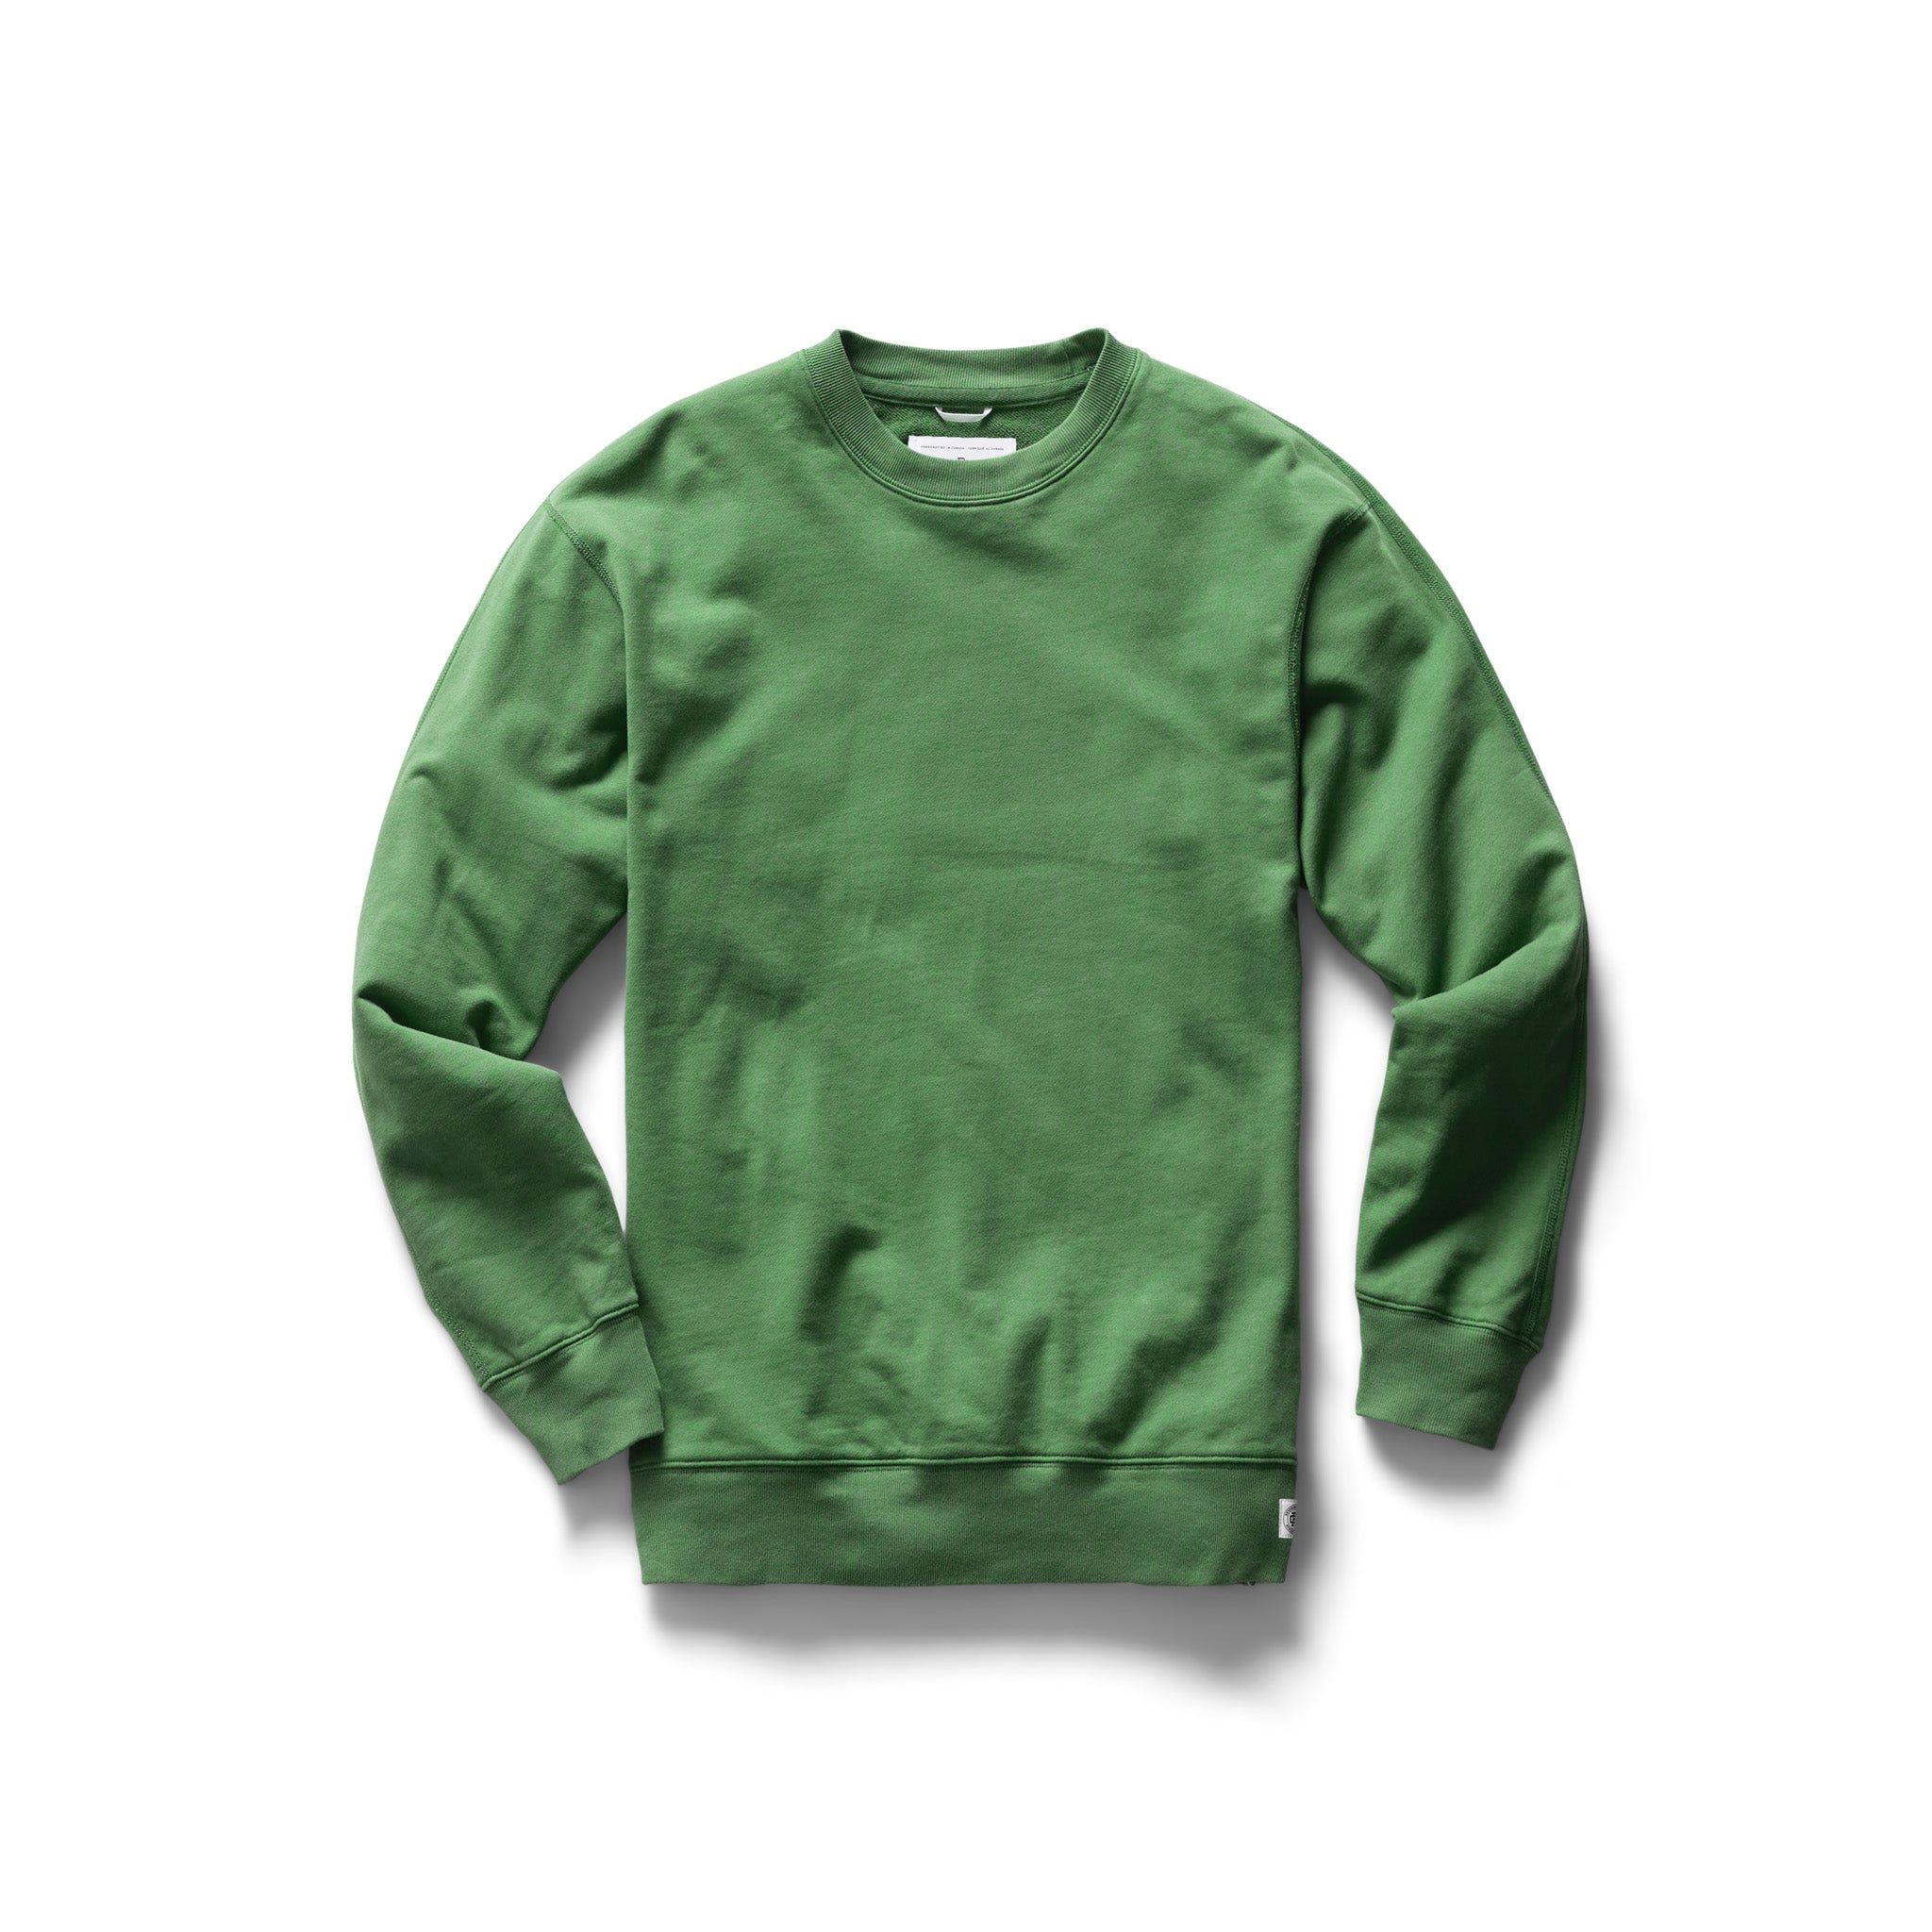 【Reigning Champ】Lightweight Terry Classic Crewneck | Reigning Champ JP